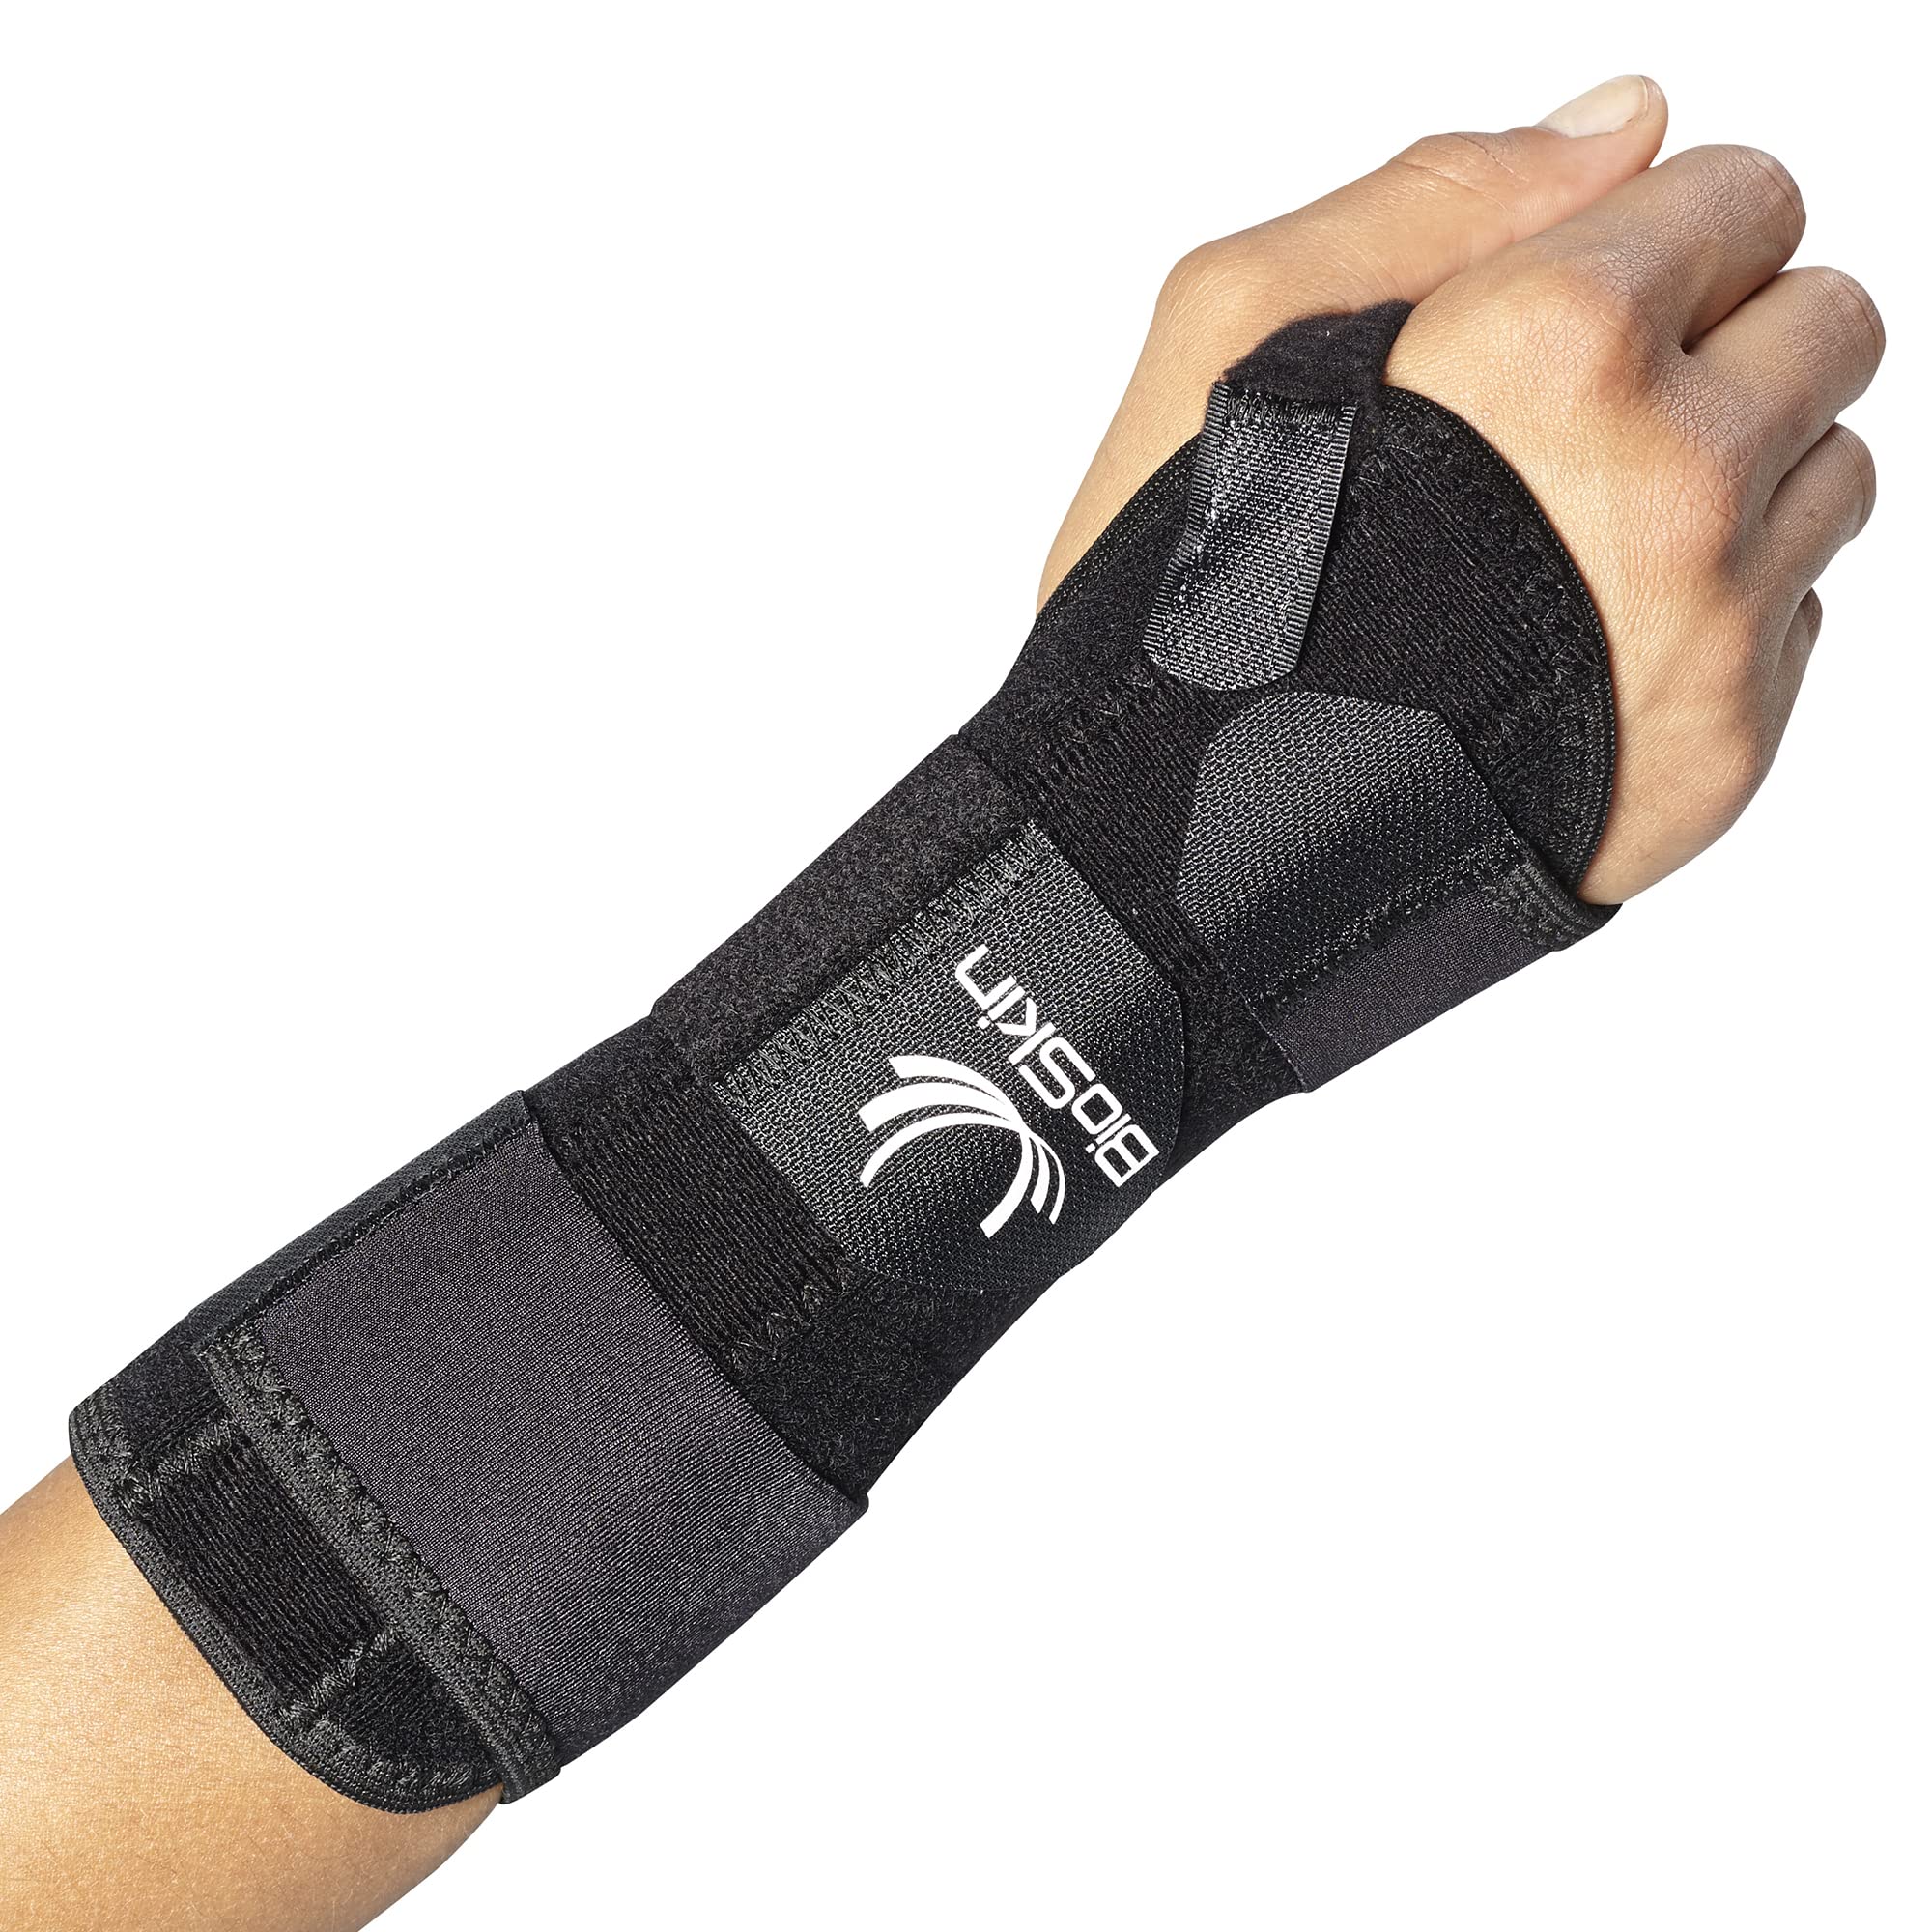 BIOSKIN Carpal Tunnel Wrist Brace Adjustable Hand Brace For Arthritis Pain  And Support Tendonitis Wrist Sprains Night Wrist Sleep Support Brace Wrist  Splint Wrist Support For Women And Men 6-inch M-L (Right)